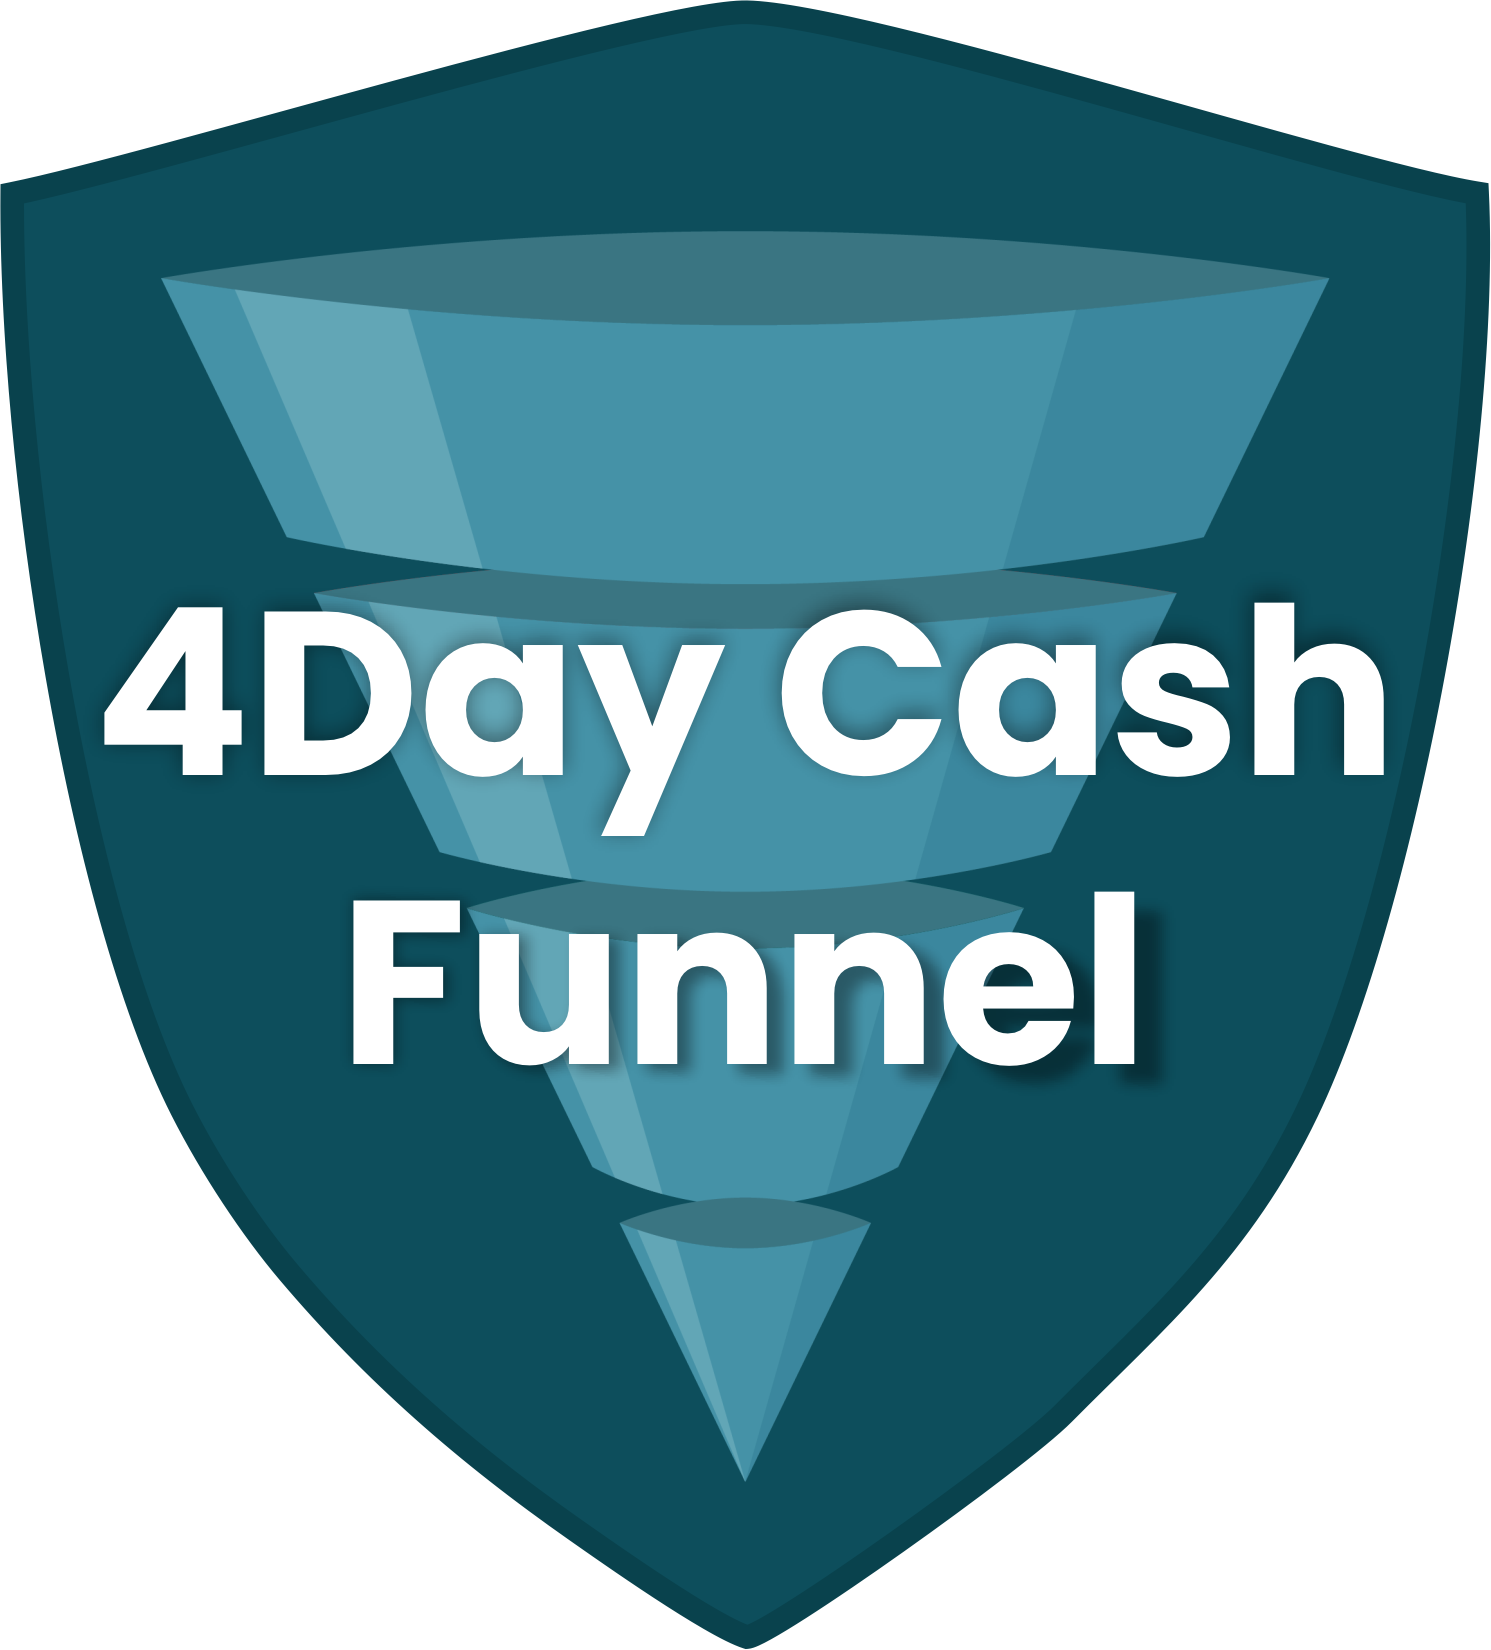 4Day Cash Funnel